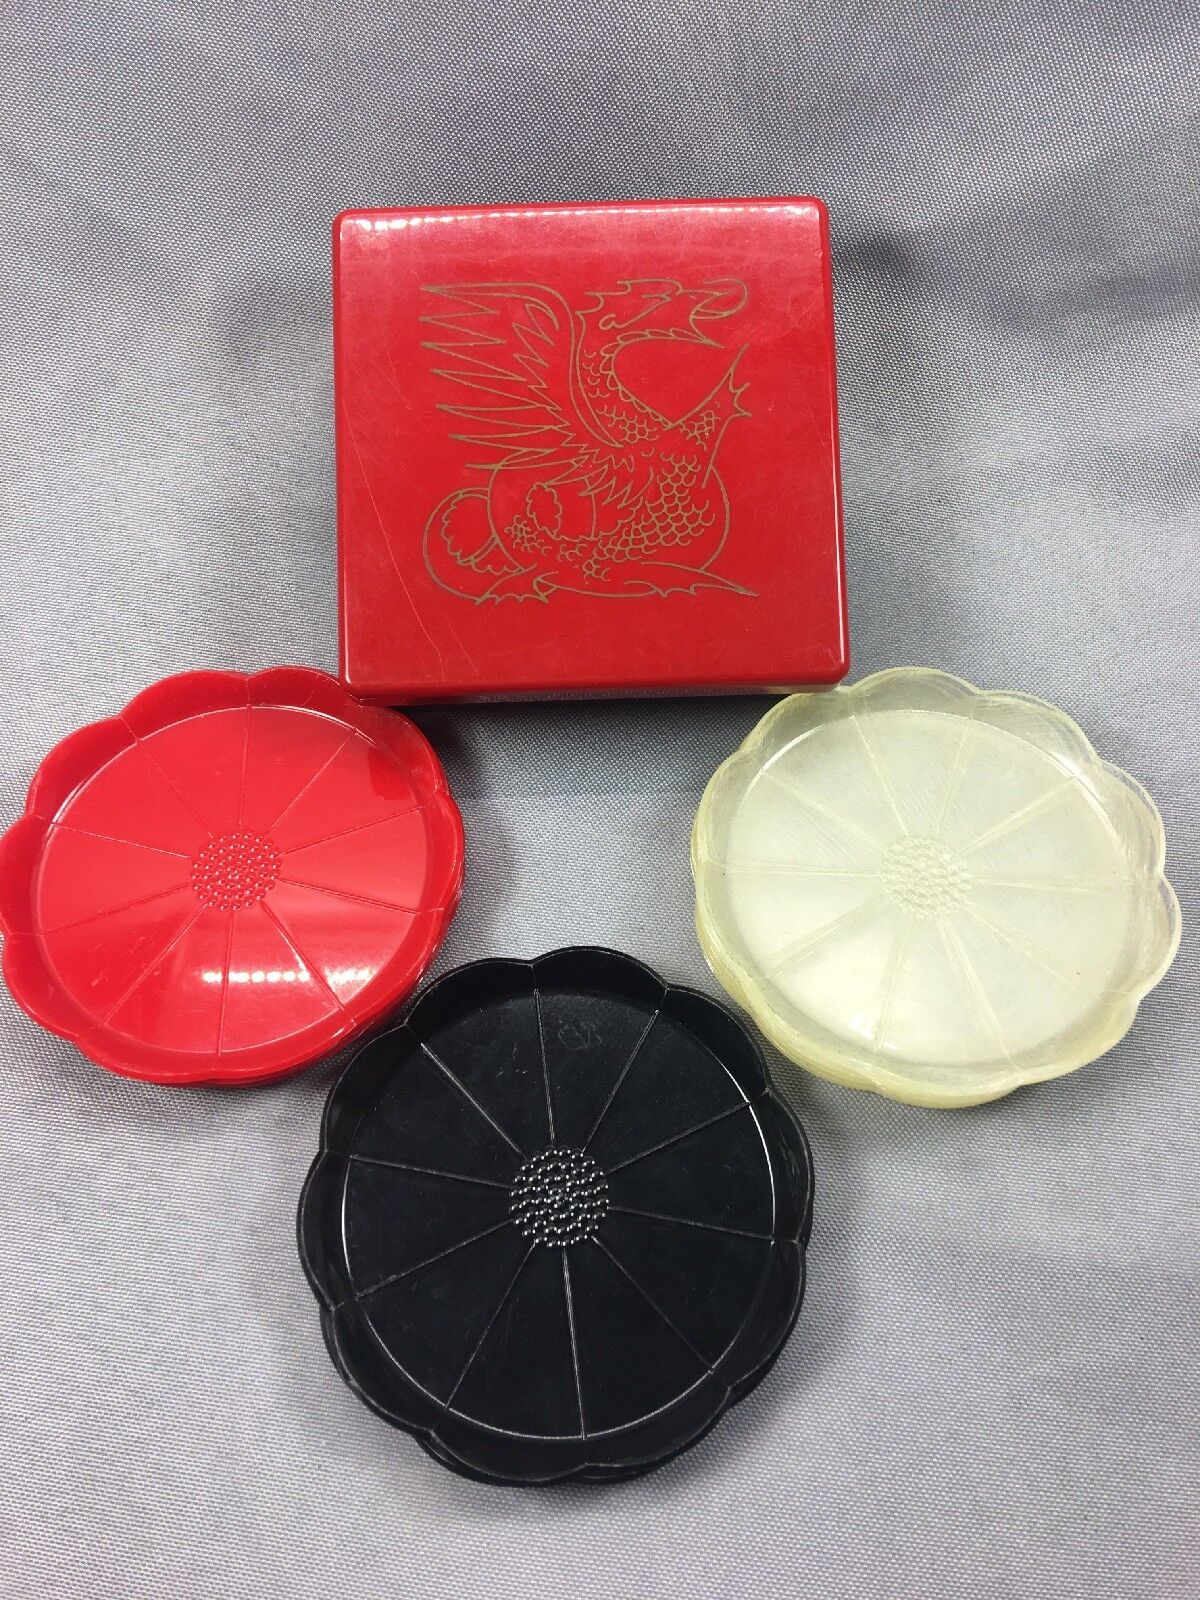 Vintage Retro Steeds The Jewel Box, 13 Coaster Set, Red, Clear And Black